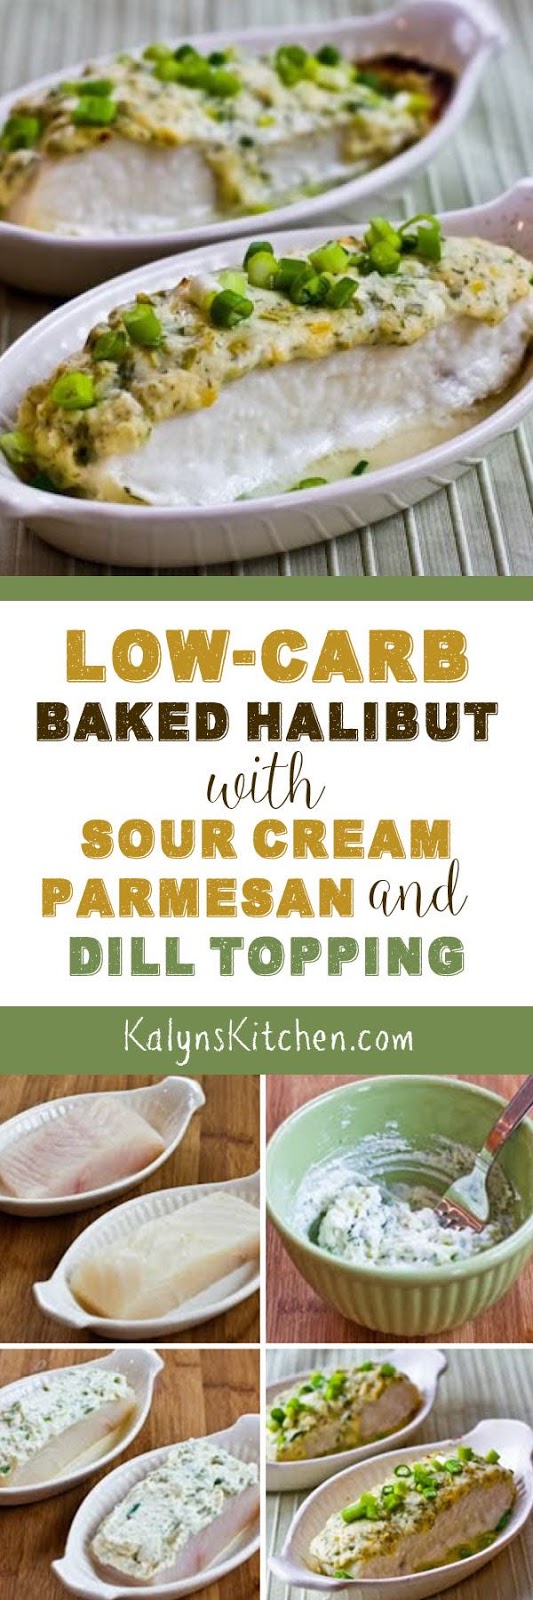 Low-Carb Baked Halibut with Sour Cream, Parmesan, and Dill Topping ...